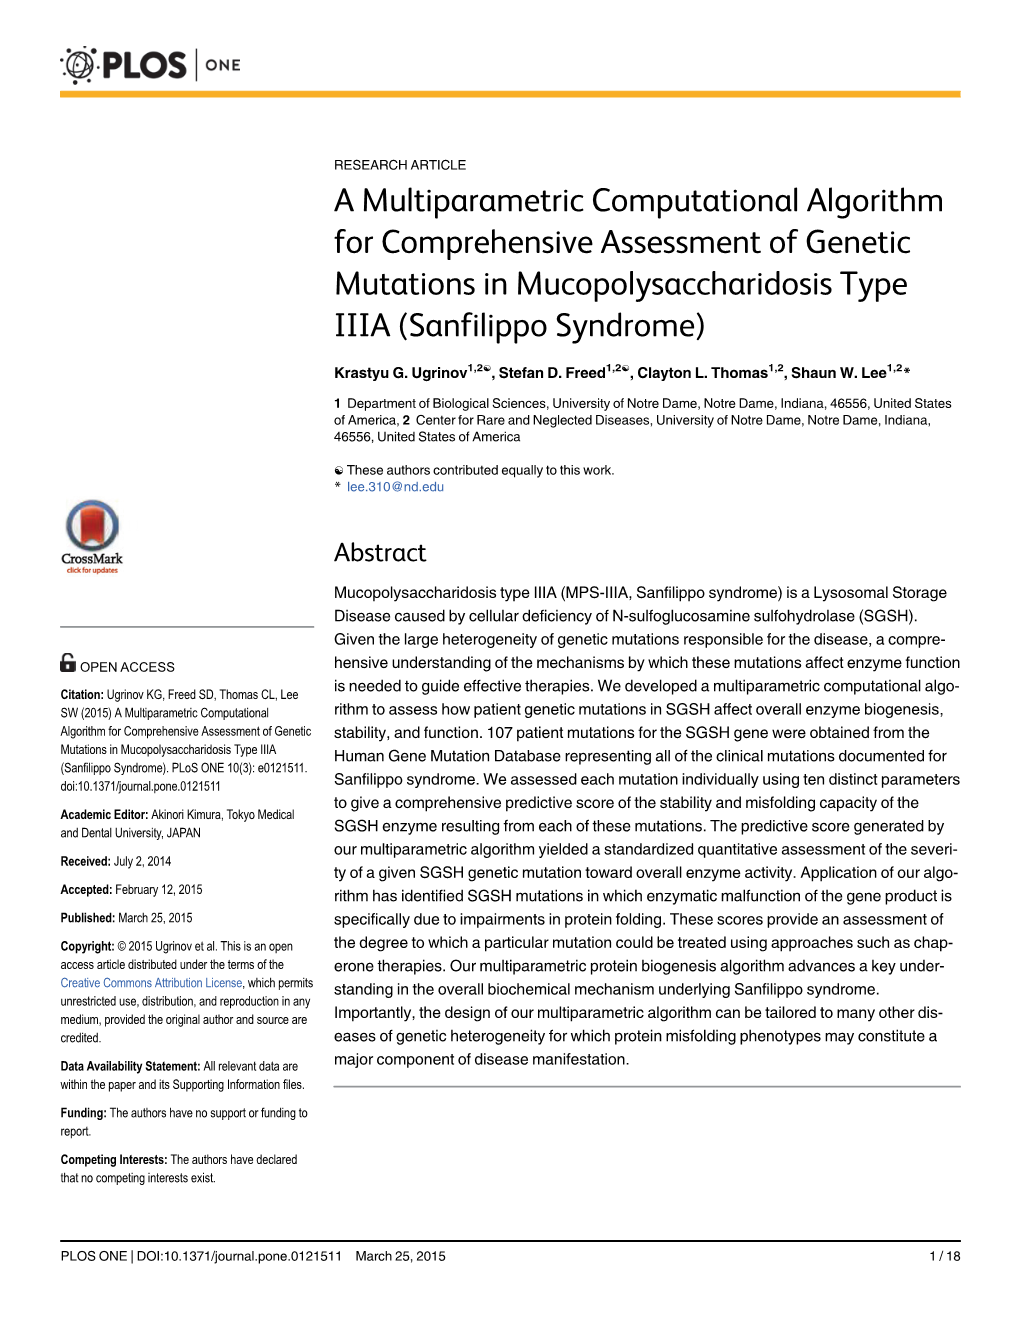 A Multiparametric Computational Algorithm for Comprehensive Assessment of Genetic Mutations in Mucopolysaccharidosis Type IIIA (Sanfilippo Syndrome)